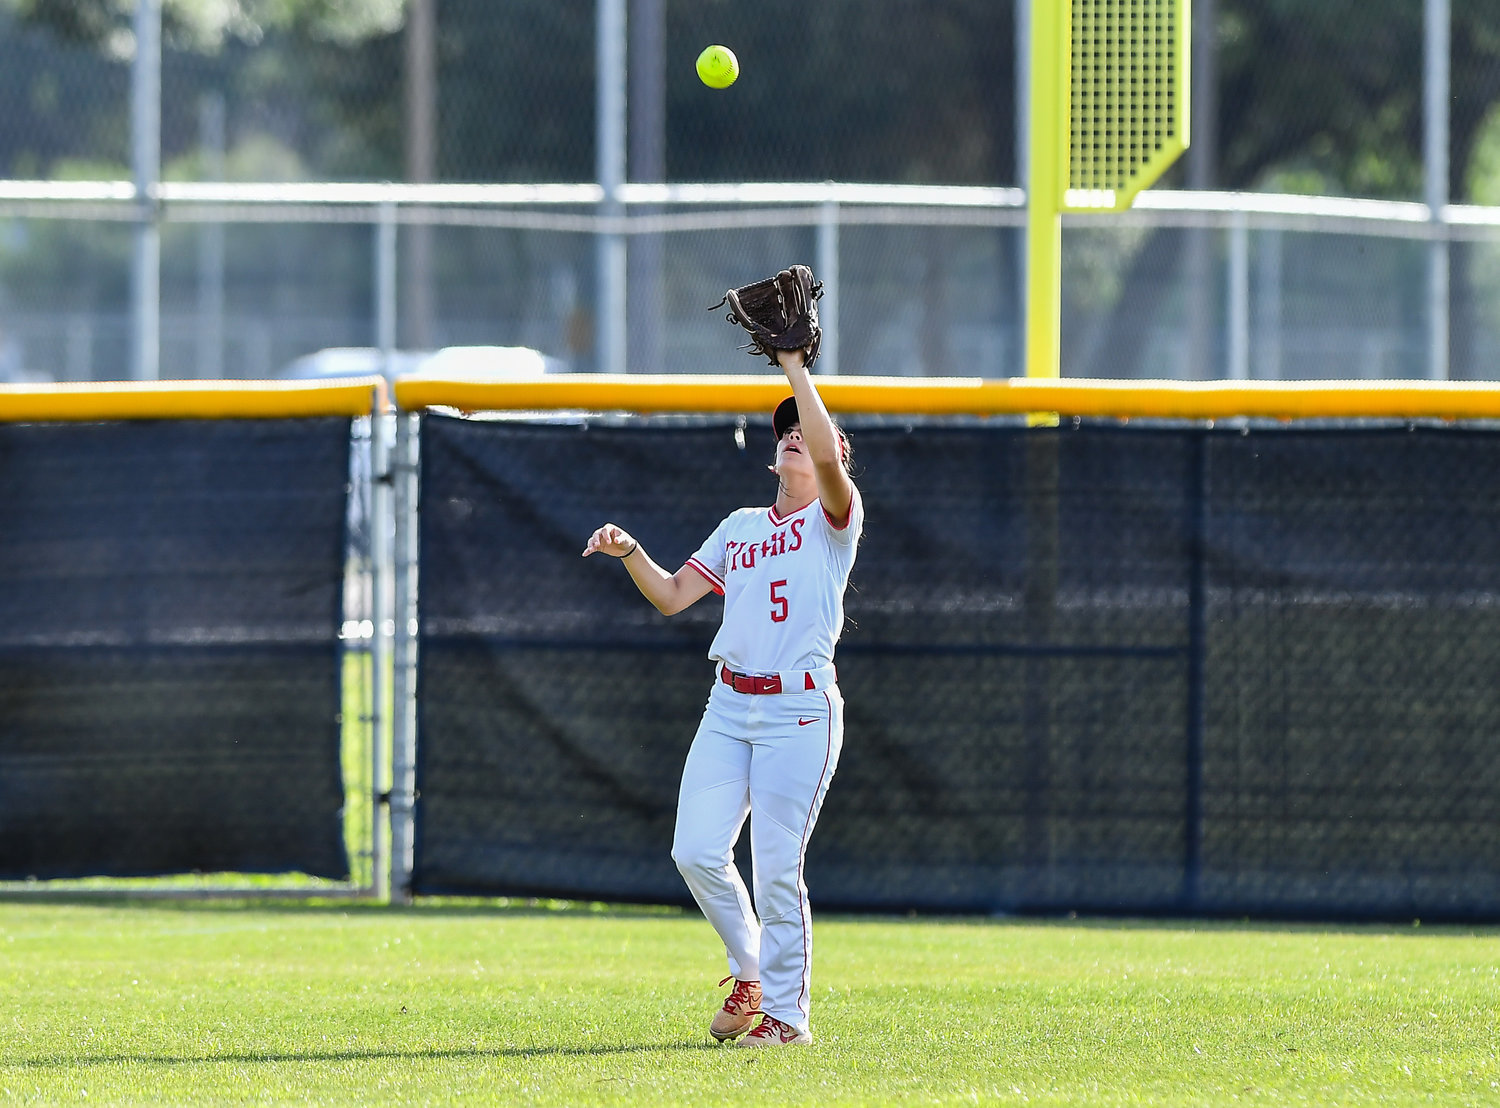 May 13, 2022: Katy's Erynne Castillo #5 makes the catch for an out during the first inning of Regional Quarterfinal  playoff between Katy and Cinco Ranch at Katy HS. (Photo by Mark Goodman / Katy Times)